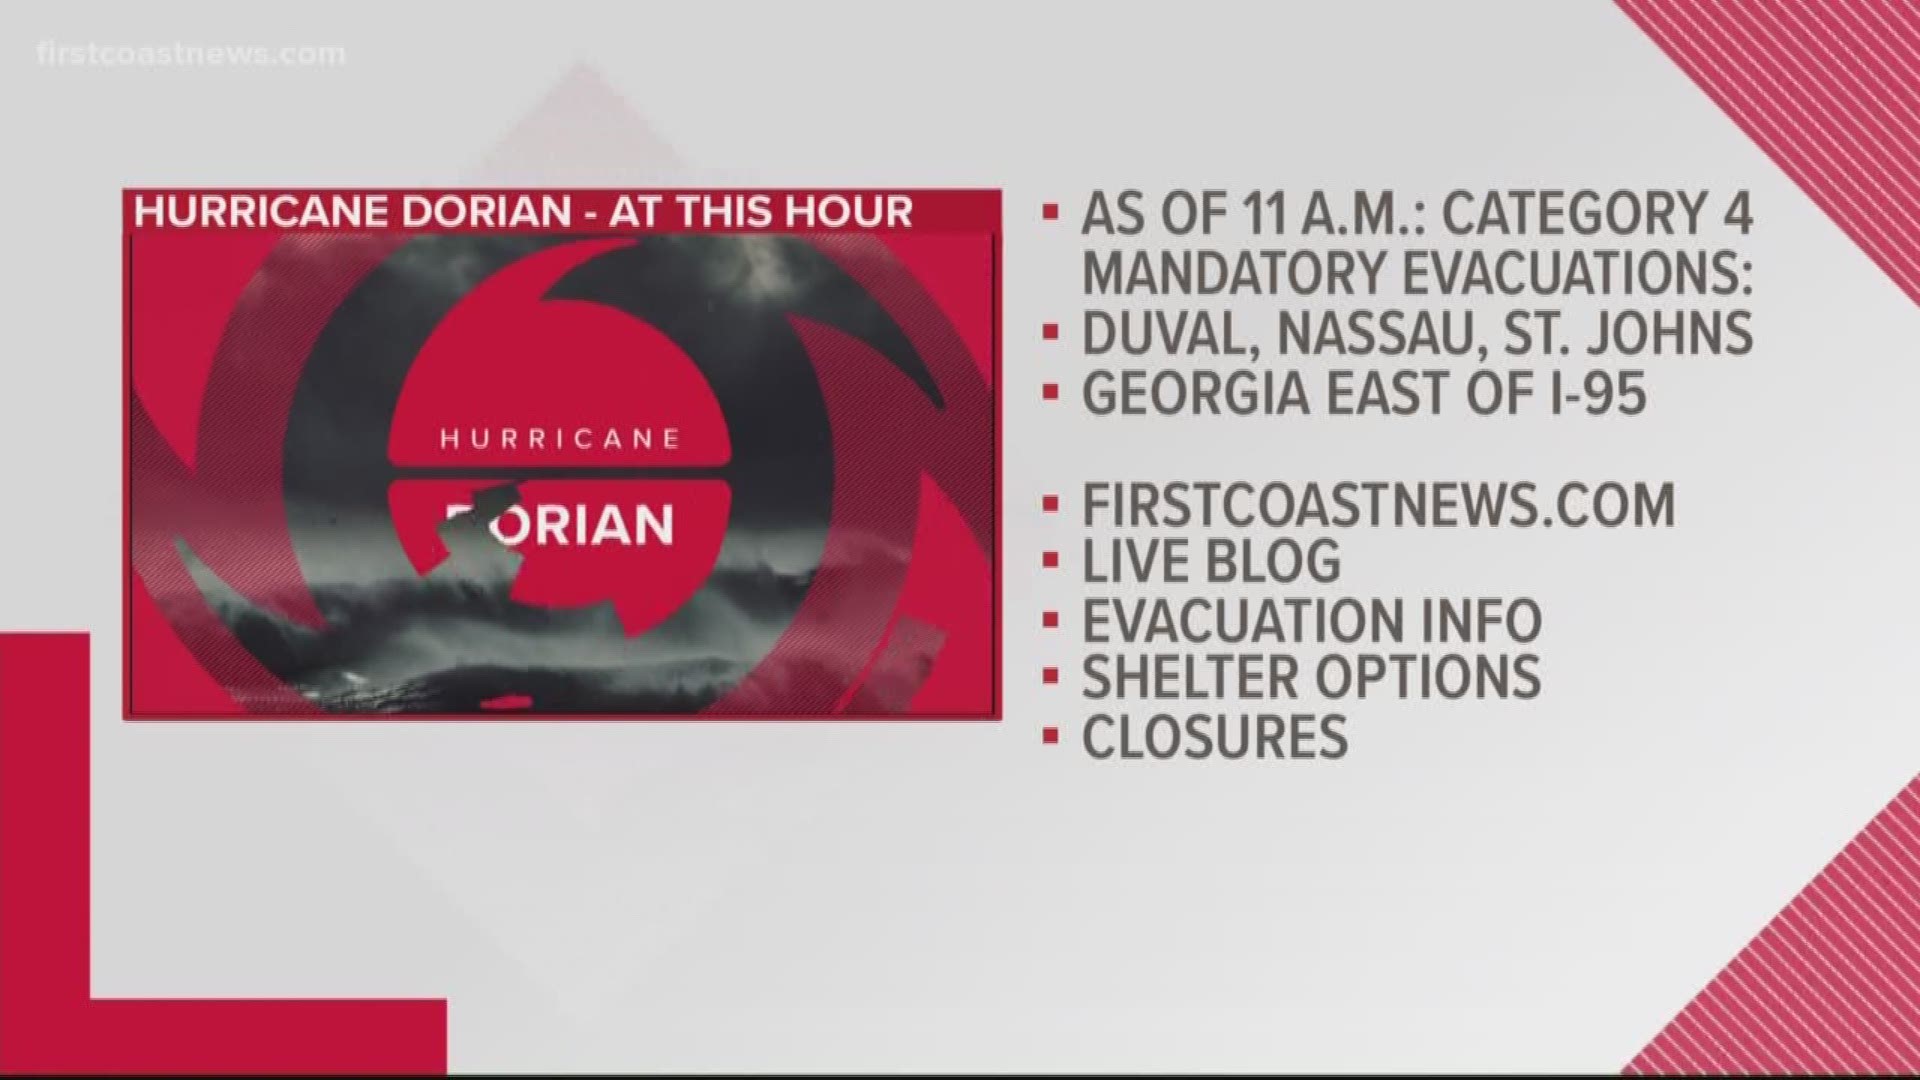 The latest update on Hurricane Dorian as of Monday at 12:07 p.m.